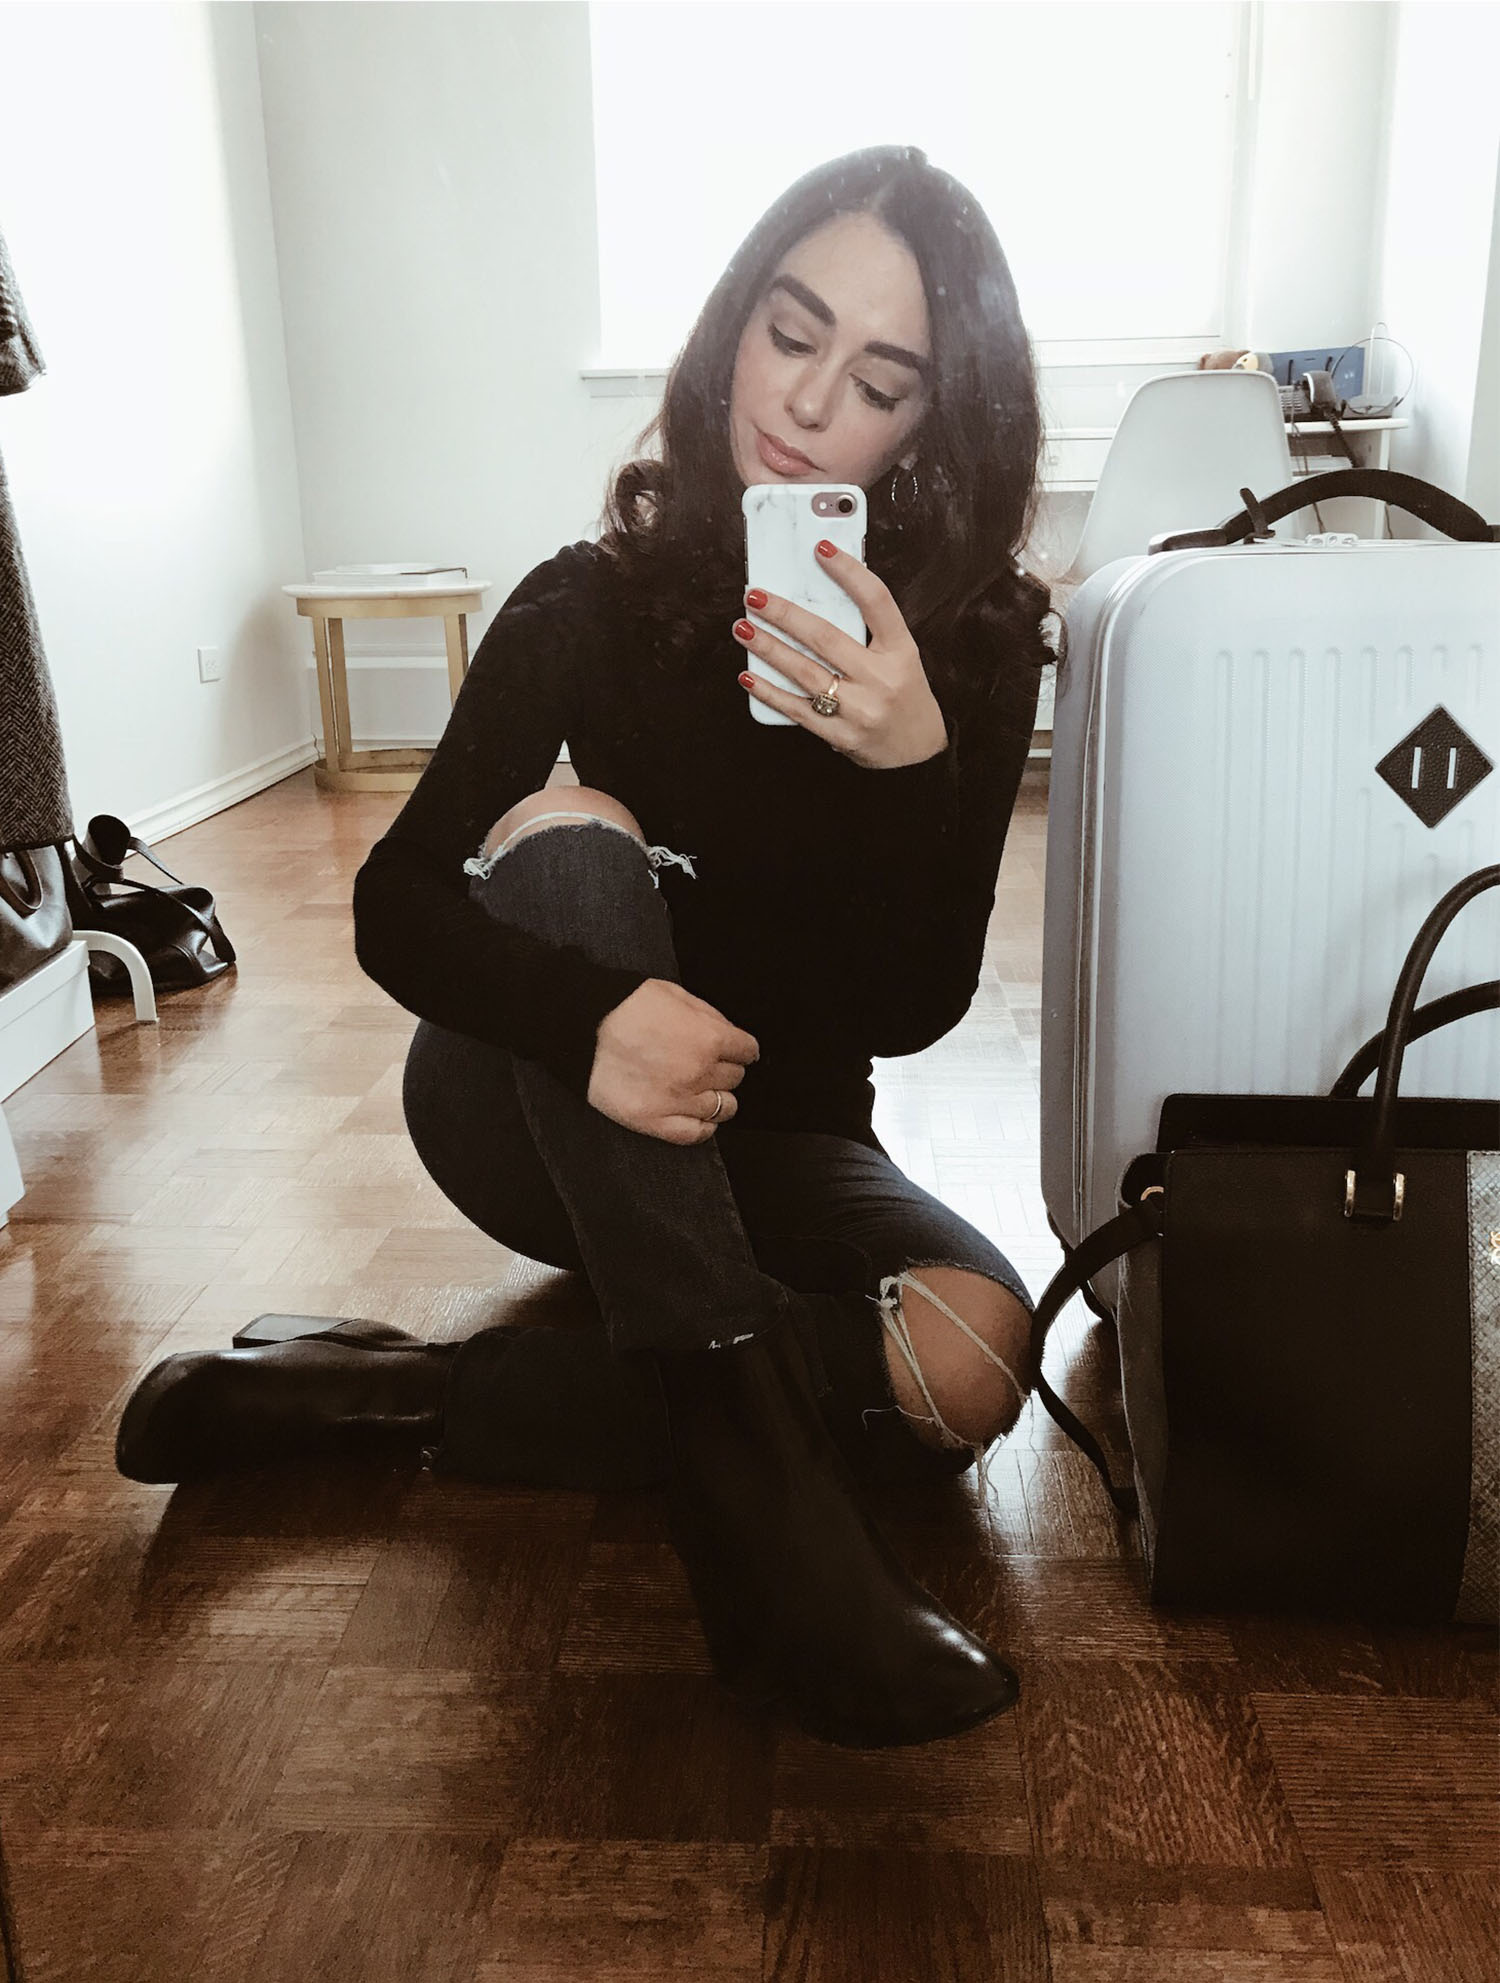 Canadian fashion blogger Cee Fardoe of Coco & Vera takes a selfie before a business trip to Toronto, wearing Paige jeans and sitting next to her Herschel white suitcase